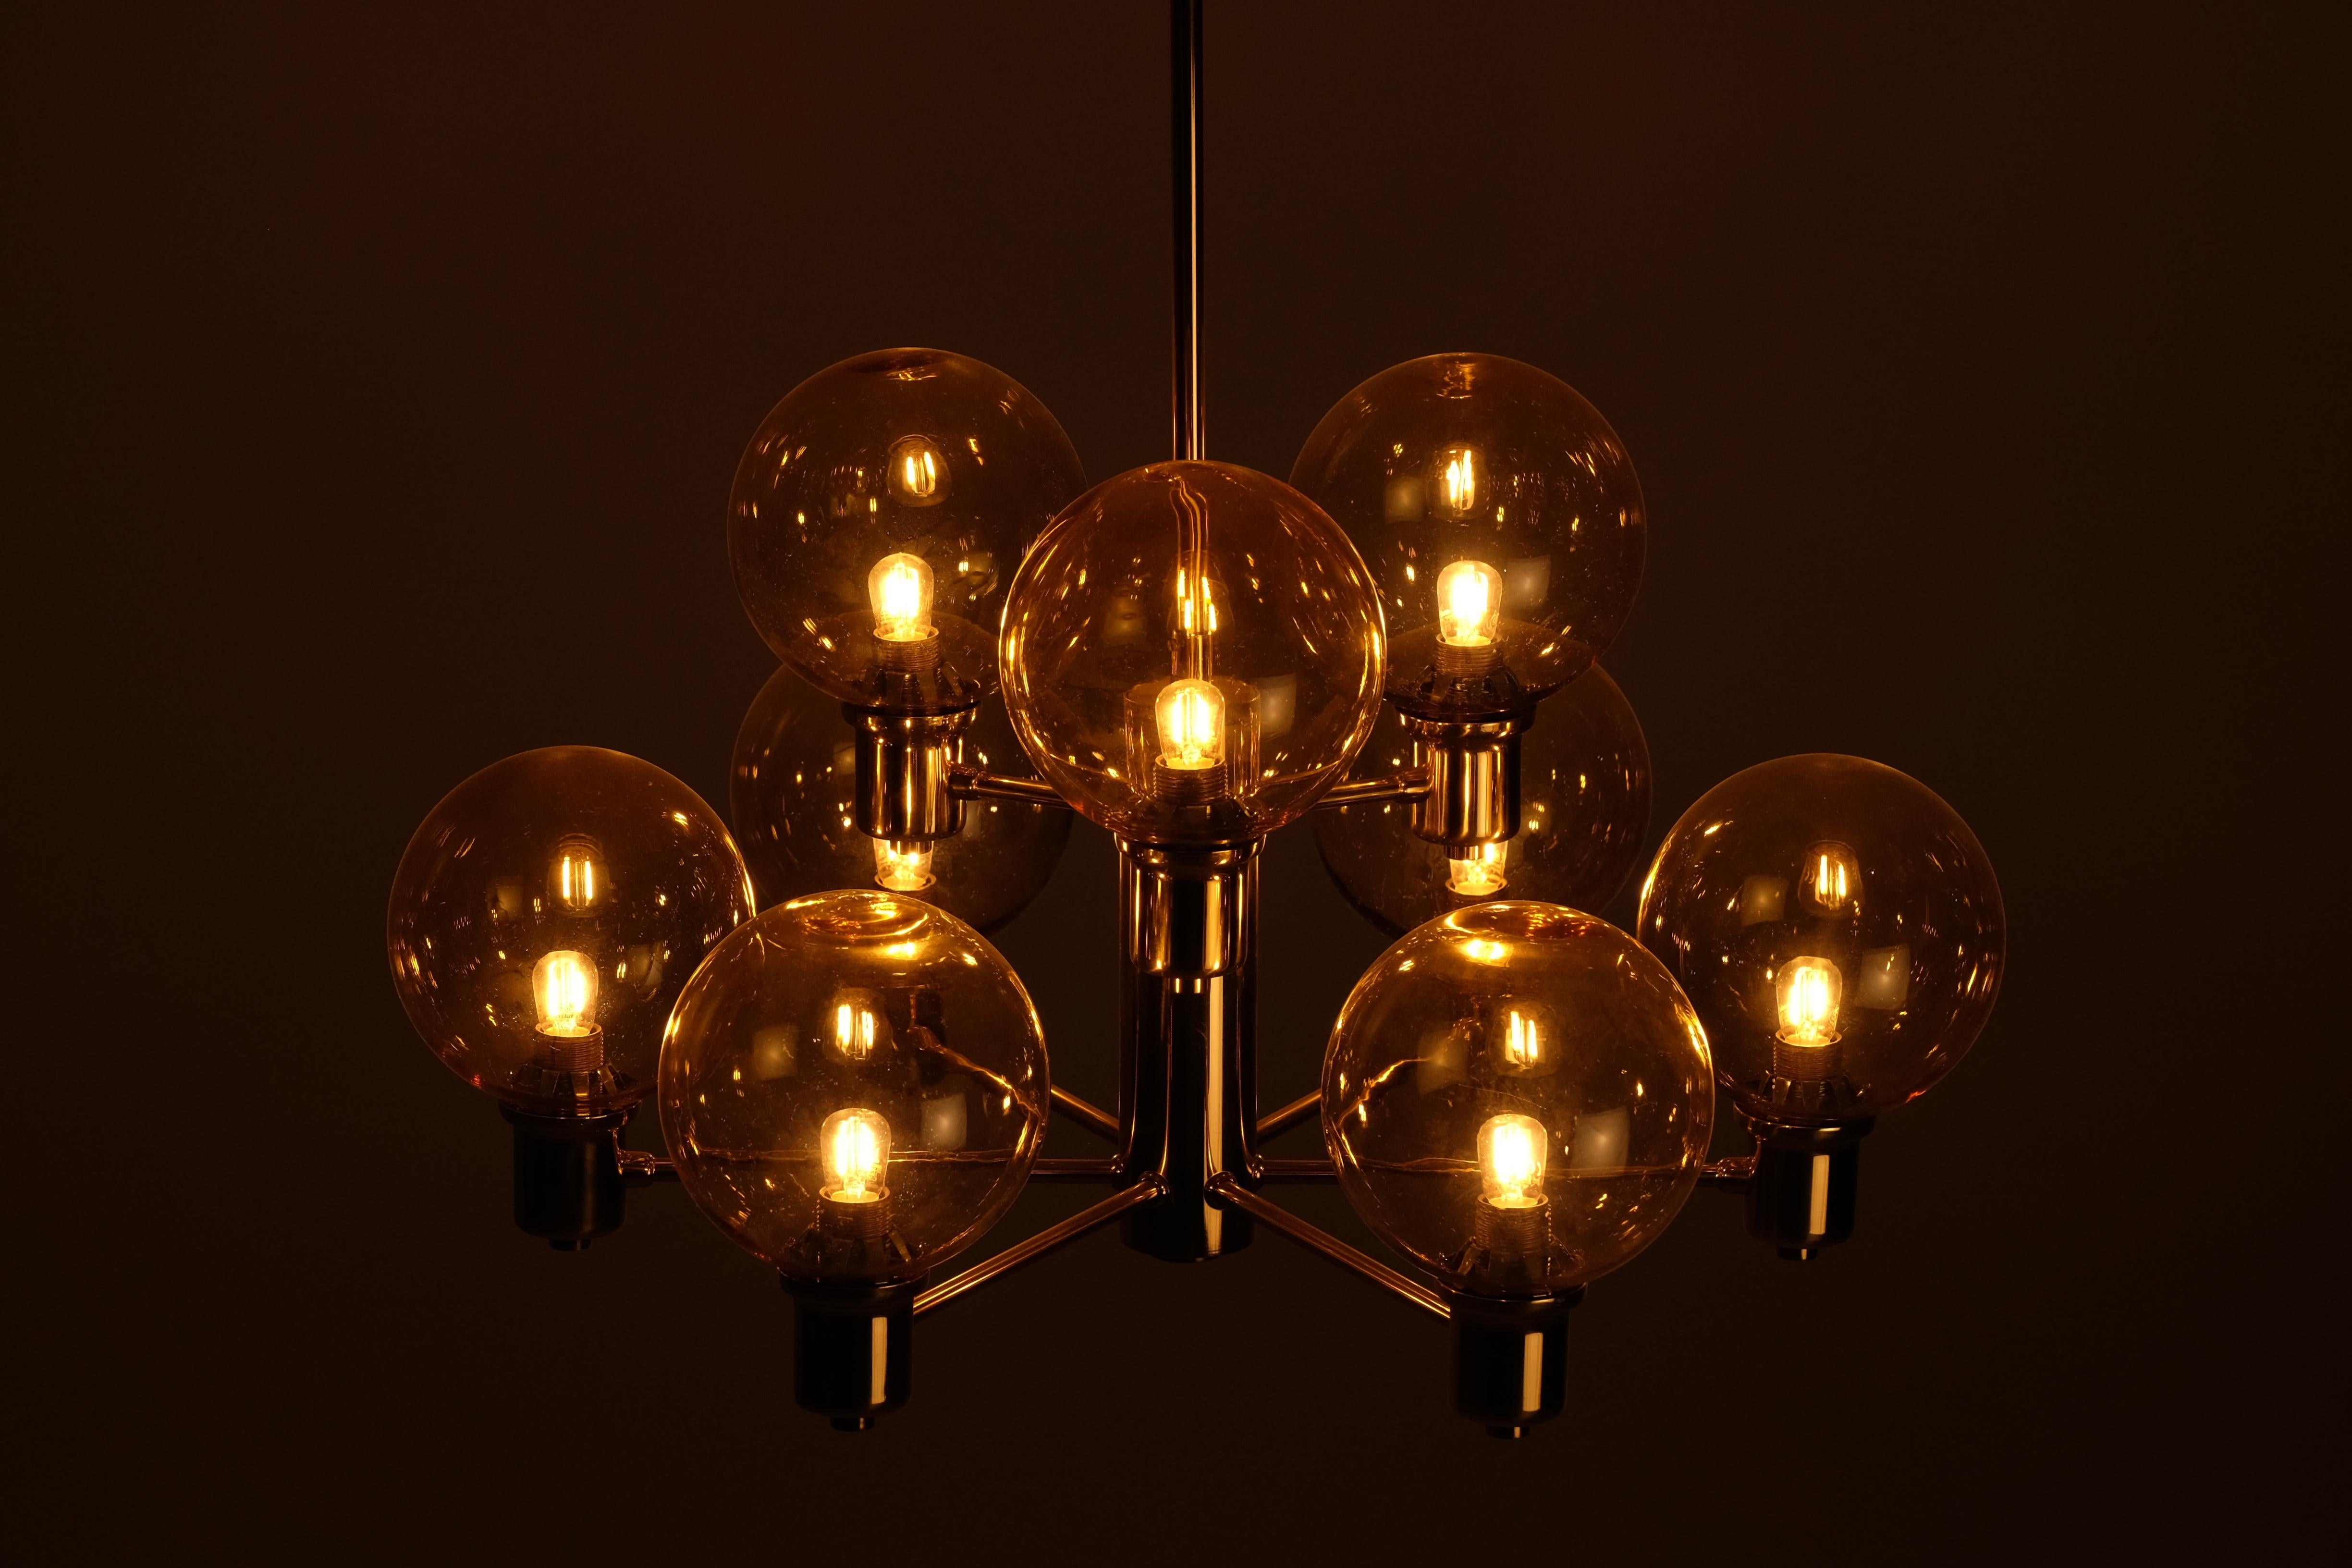 Set of 4 brass & glass chandeliers, Sweden, 1960s For Sale 1